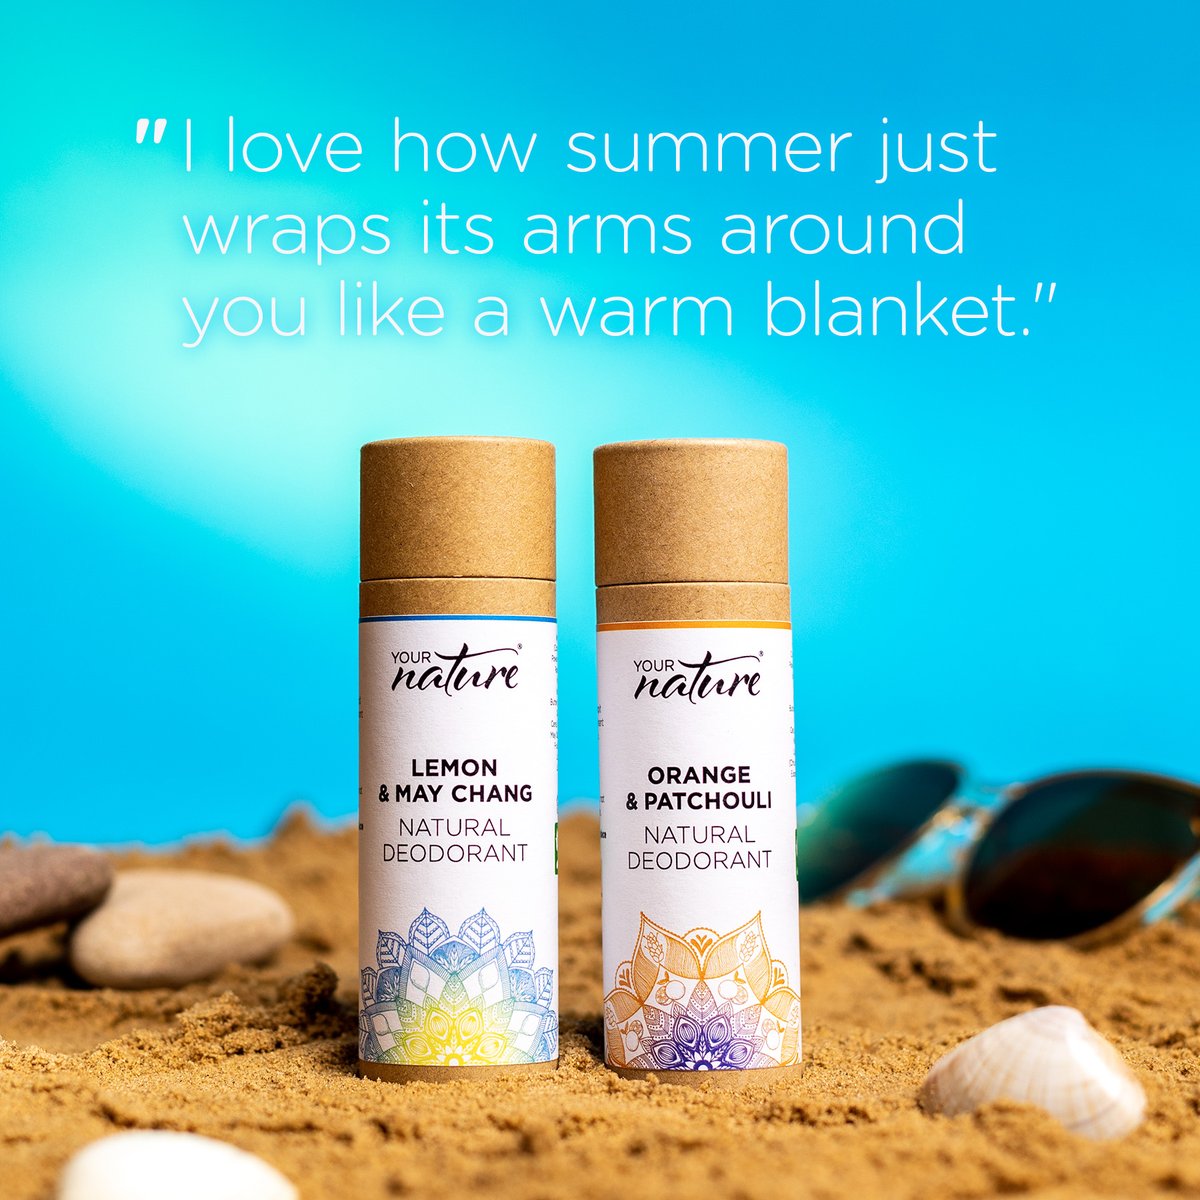 Our natural deodorants are perfect for this warm summer weather neutralising odour and providing long lasting all day freshness!

#Nature #natural #naturaldeodorant #plasticfree #zerowaste  #sustainability #nowaste #yournaturedeodorant #summer #naturalalternative